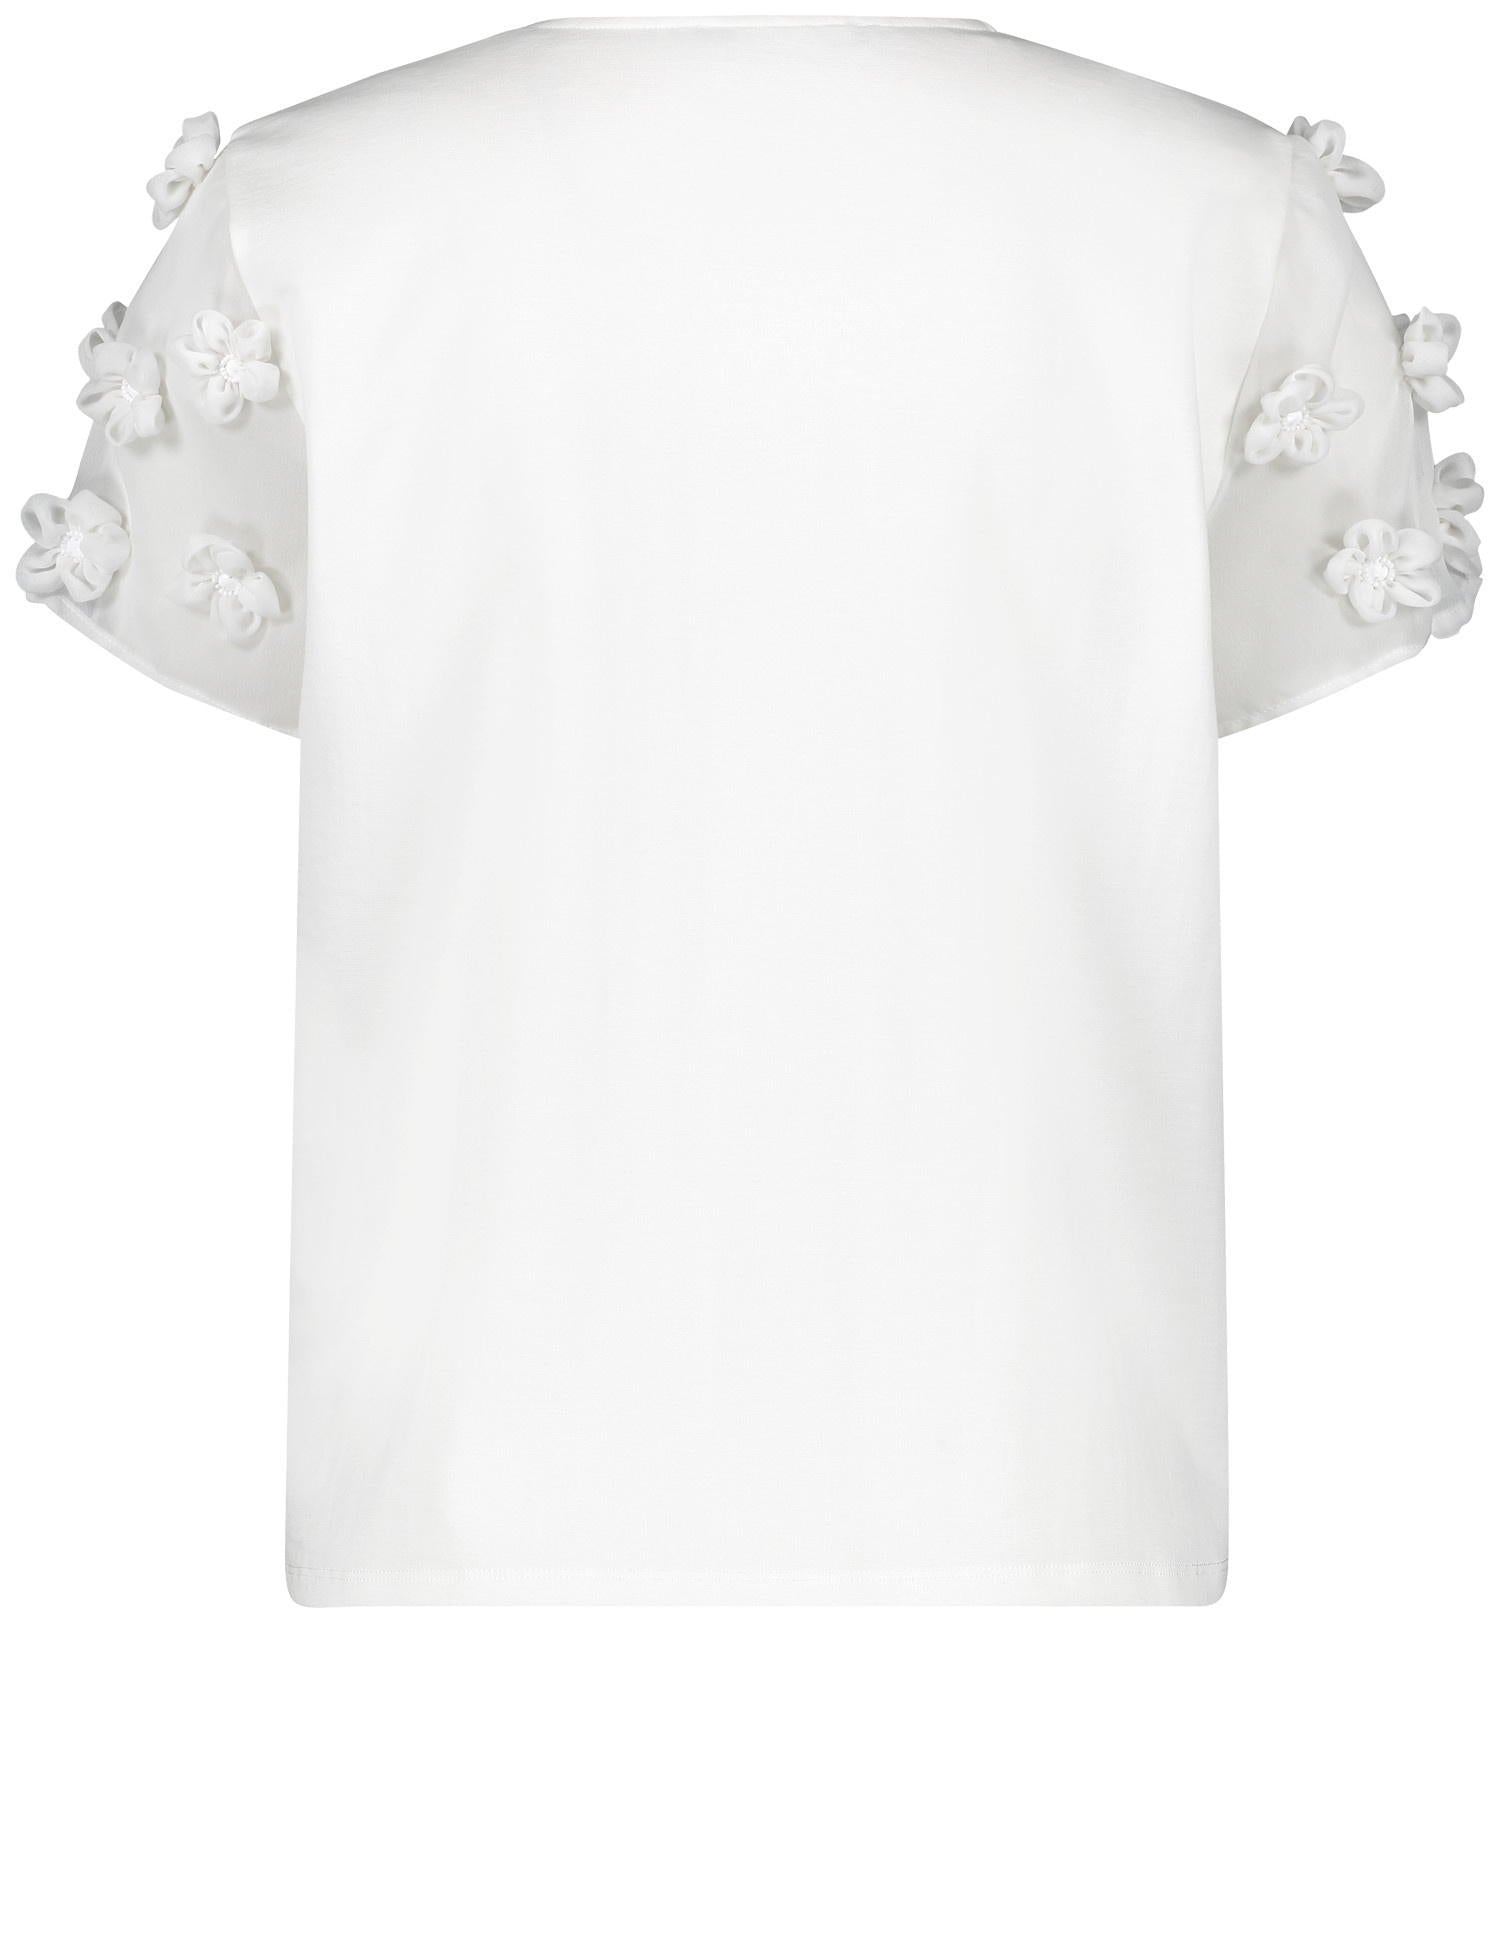 T-Shirt With Floral Decoration_571325-16130_9700_03